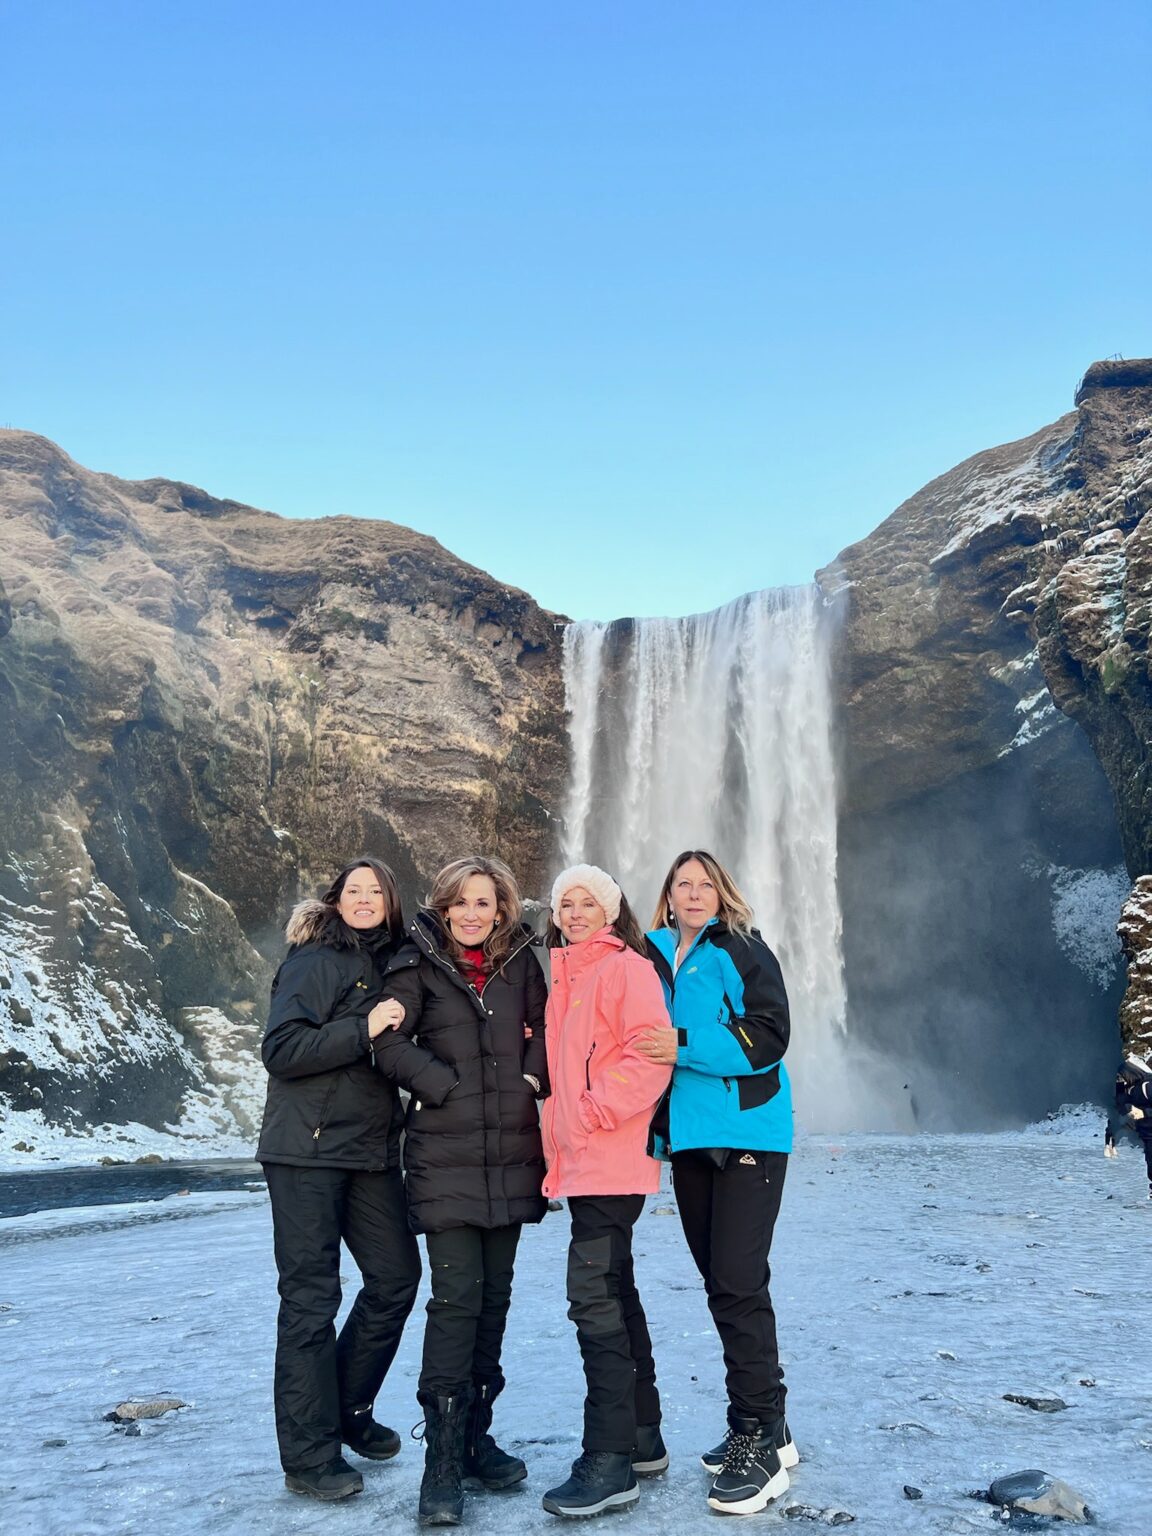 Women-Only: Spirit of Iceland with Northern Lights